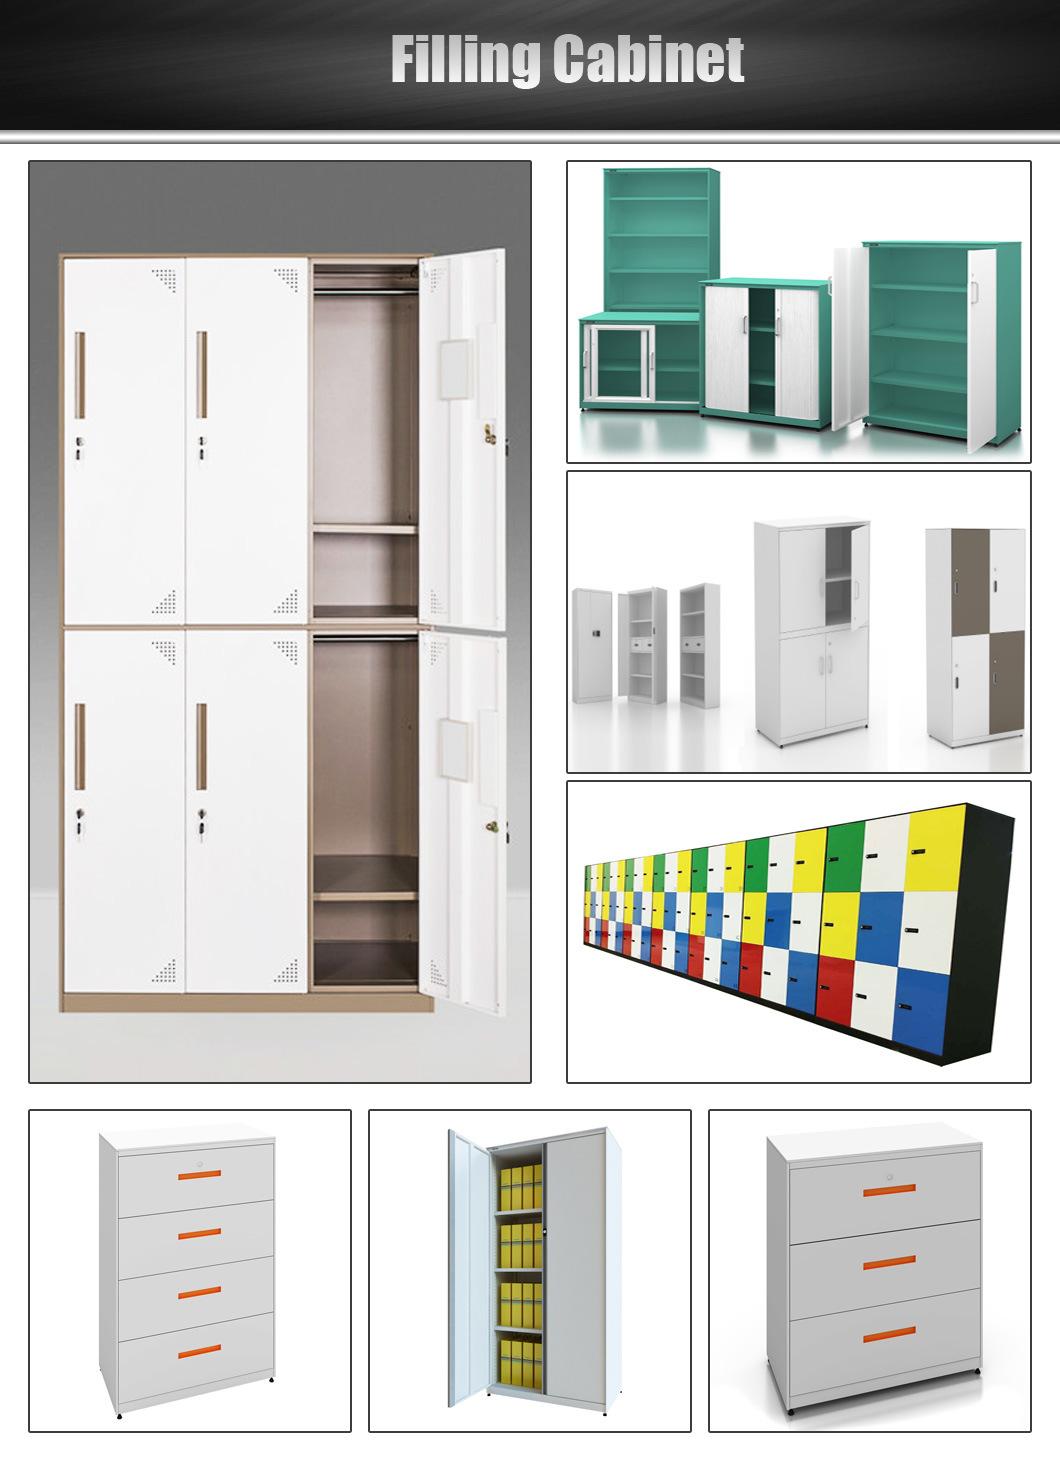 Sturdy Package Work Storage Cabinets with Environmentally-Friendly Materials